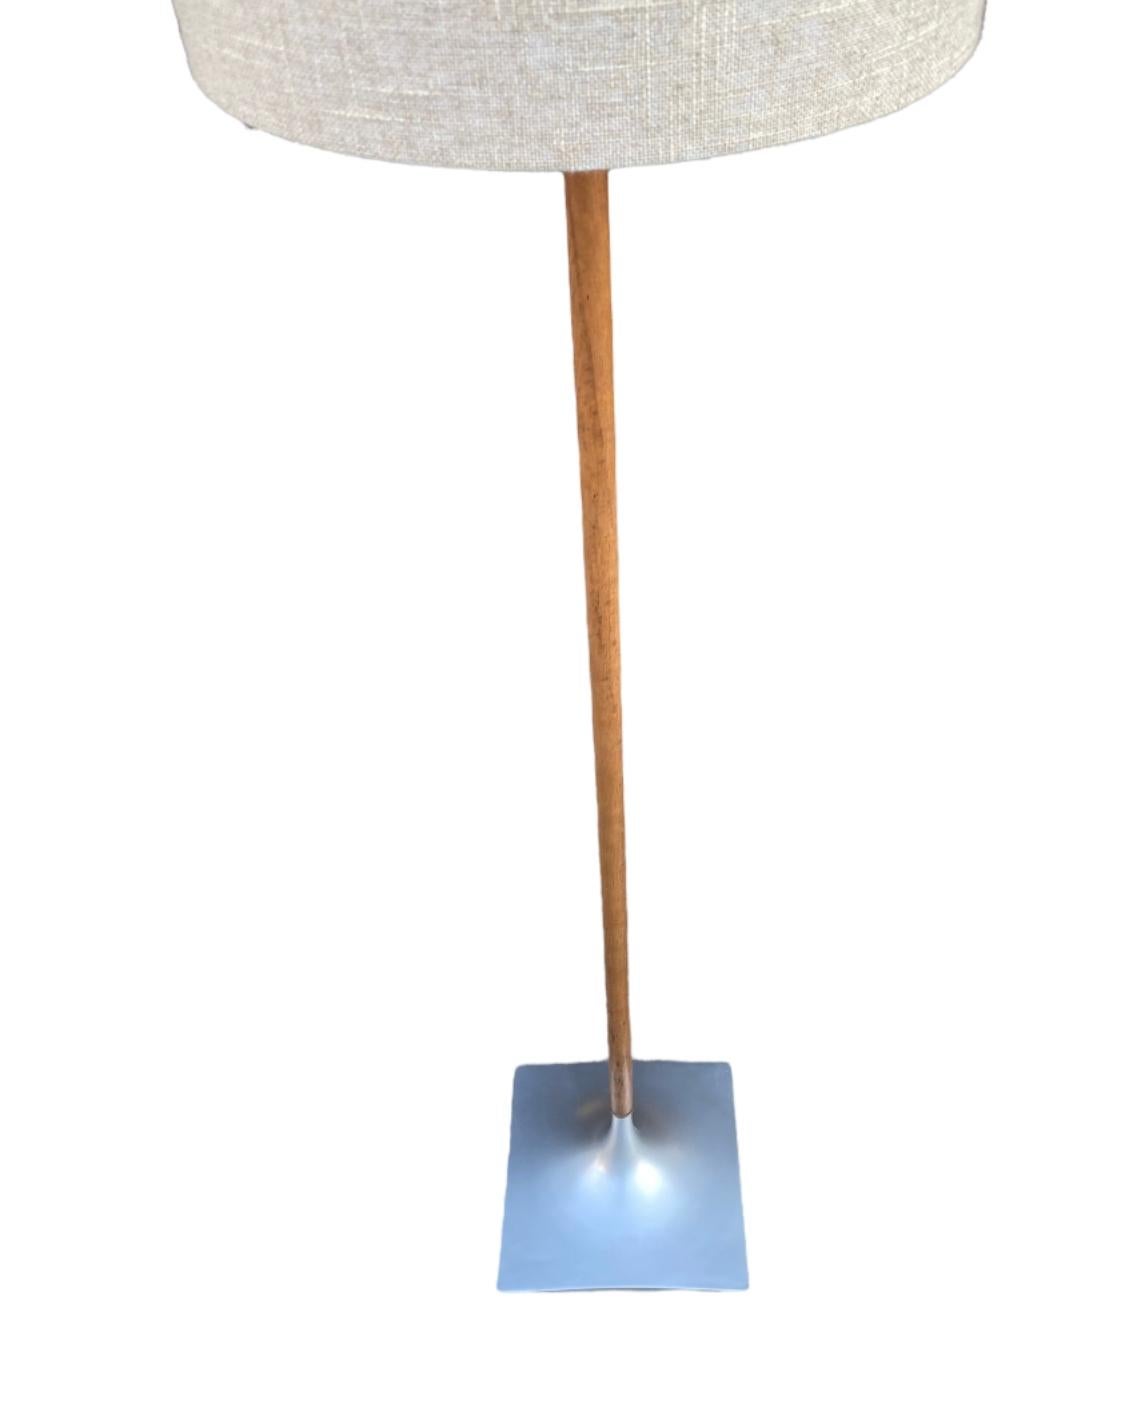 Beautiful walnut floor lamp by Laurel Lamp Company. Elegance from head to toe, featuring textured linen shade, walnut pole, and graduated tulip square base. Circa 1960s, with later barrel shade. In good condition with full function. Accommodates